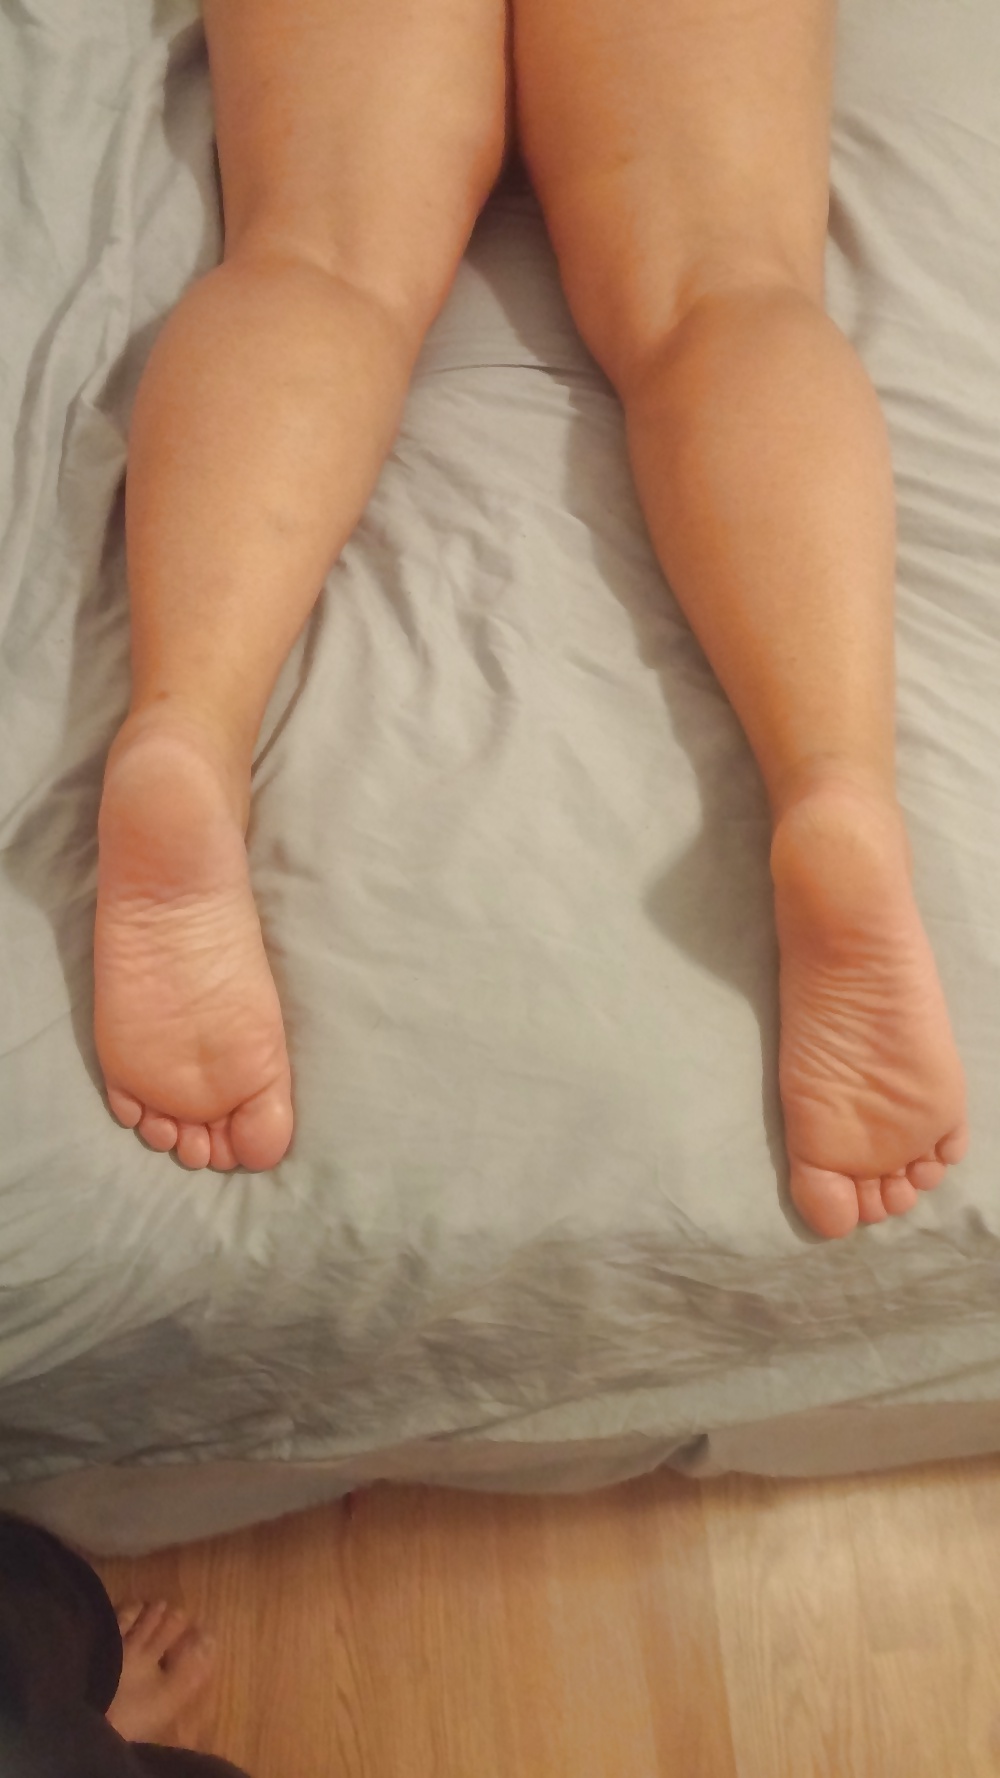 My sexy wife's feet ass toes bbw milf pict gal